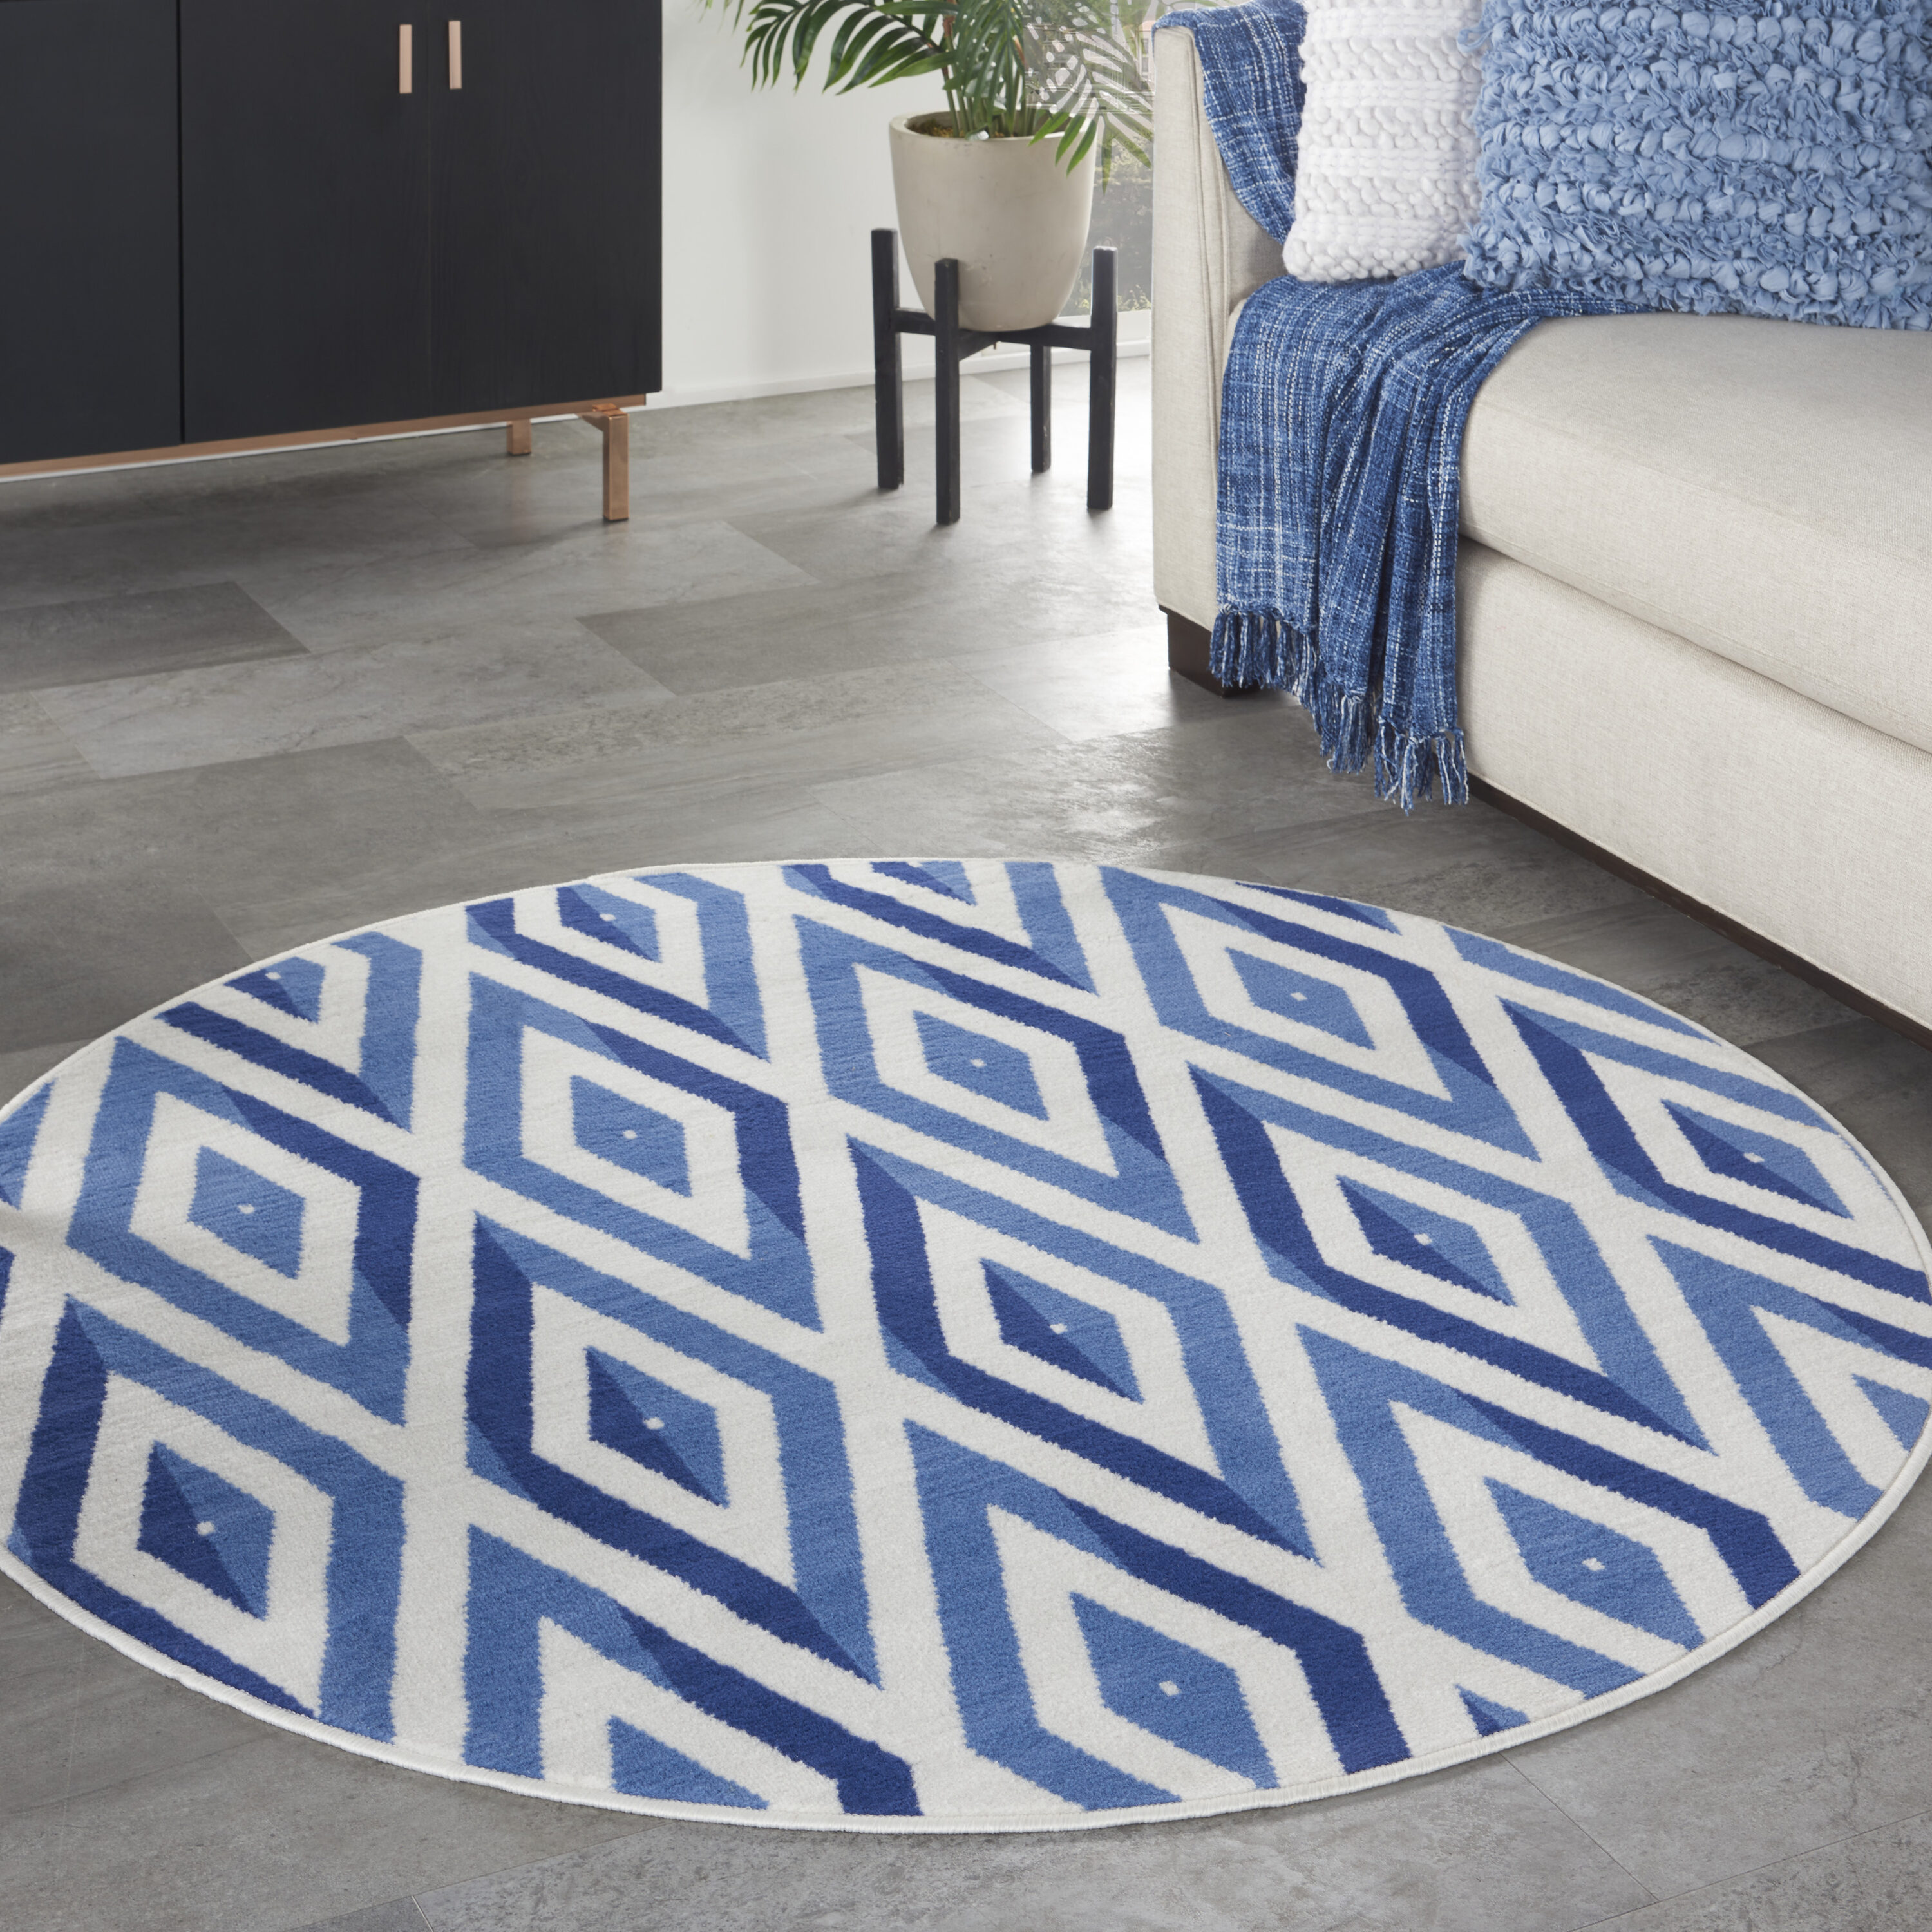 Nourison Whimsicle 5 X 5 Ivory Blue Round Indoor Geometric Area Rug in ...